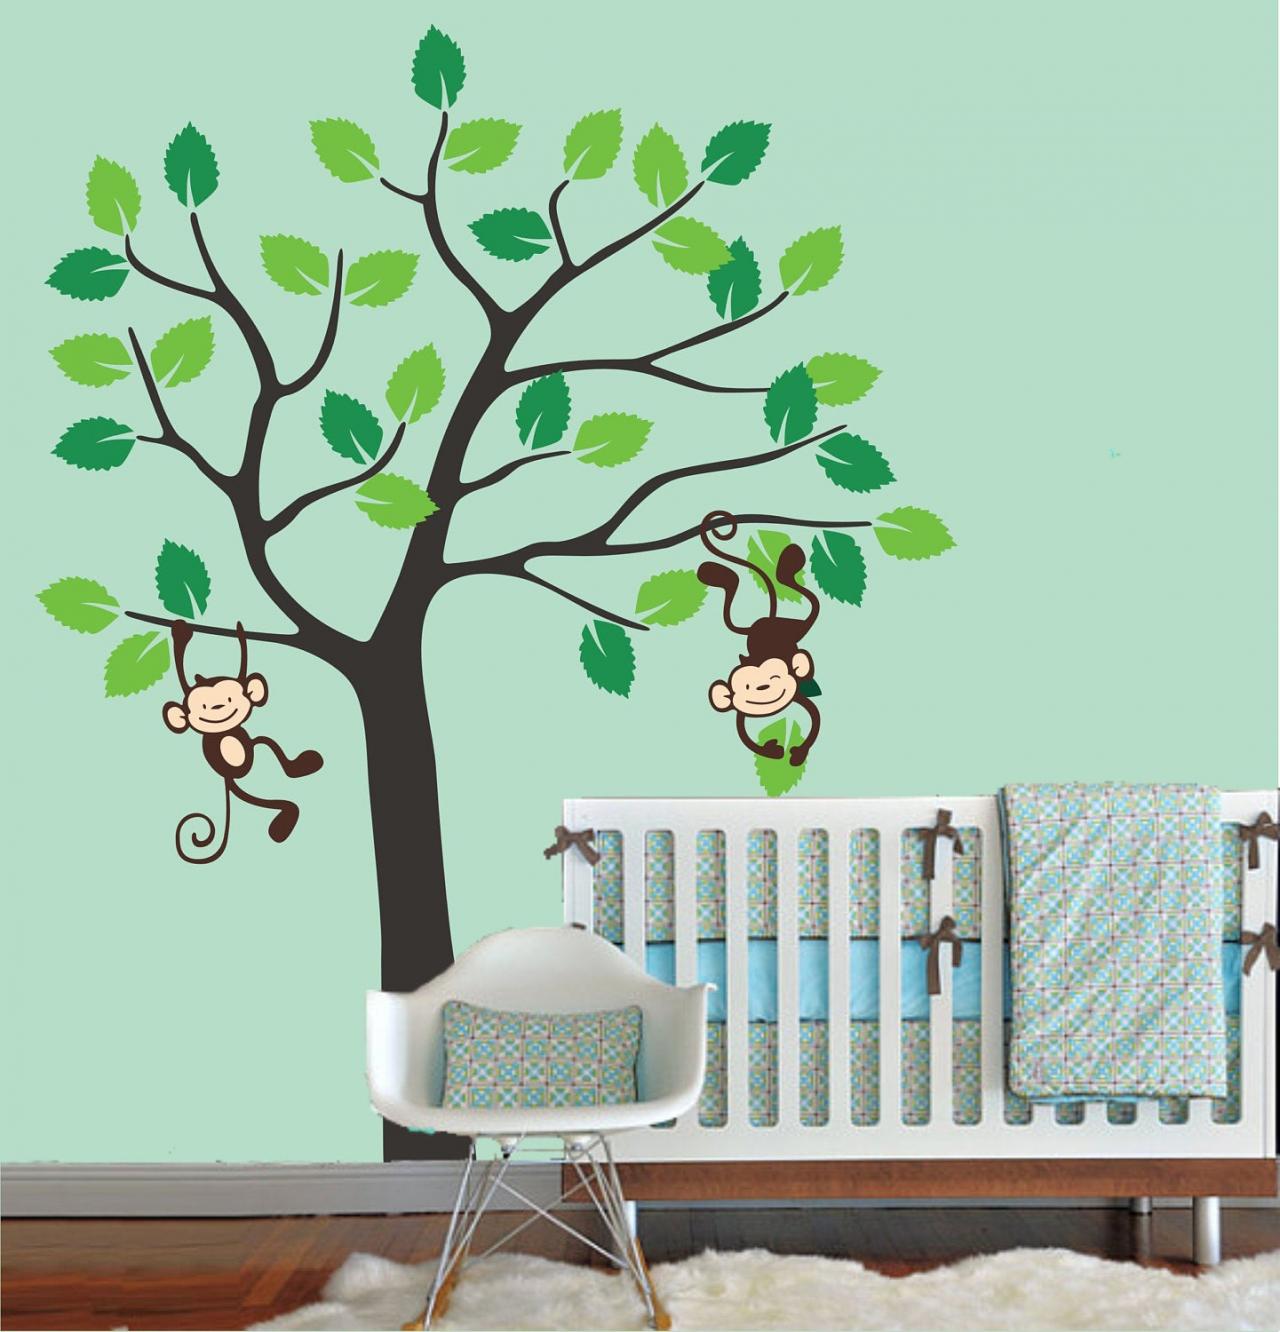 Vinyl Wall Decals Simple Tree With Cute Monkey Nursery Kids Home Decor Leaf Living Room Wall Stickers Bedroom Baby Room Murals H867